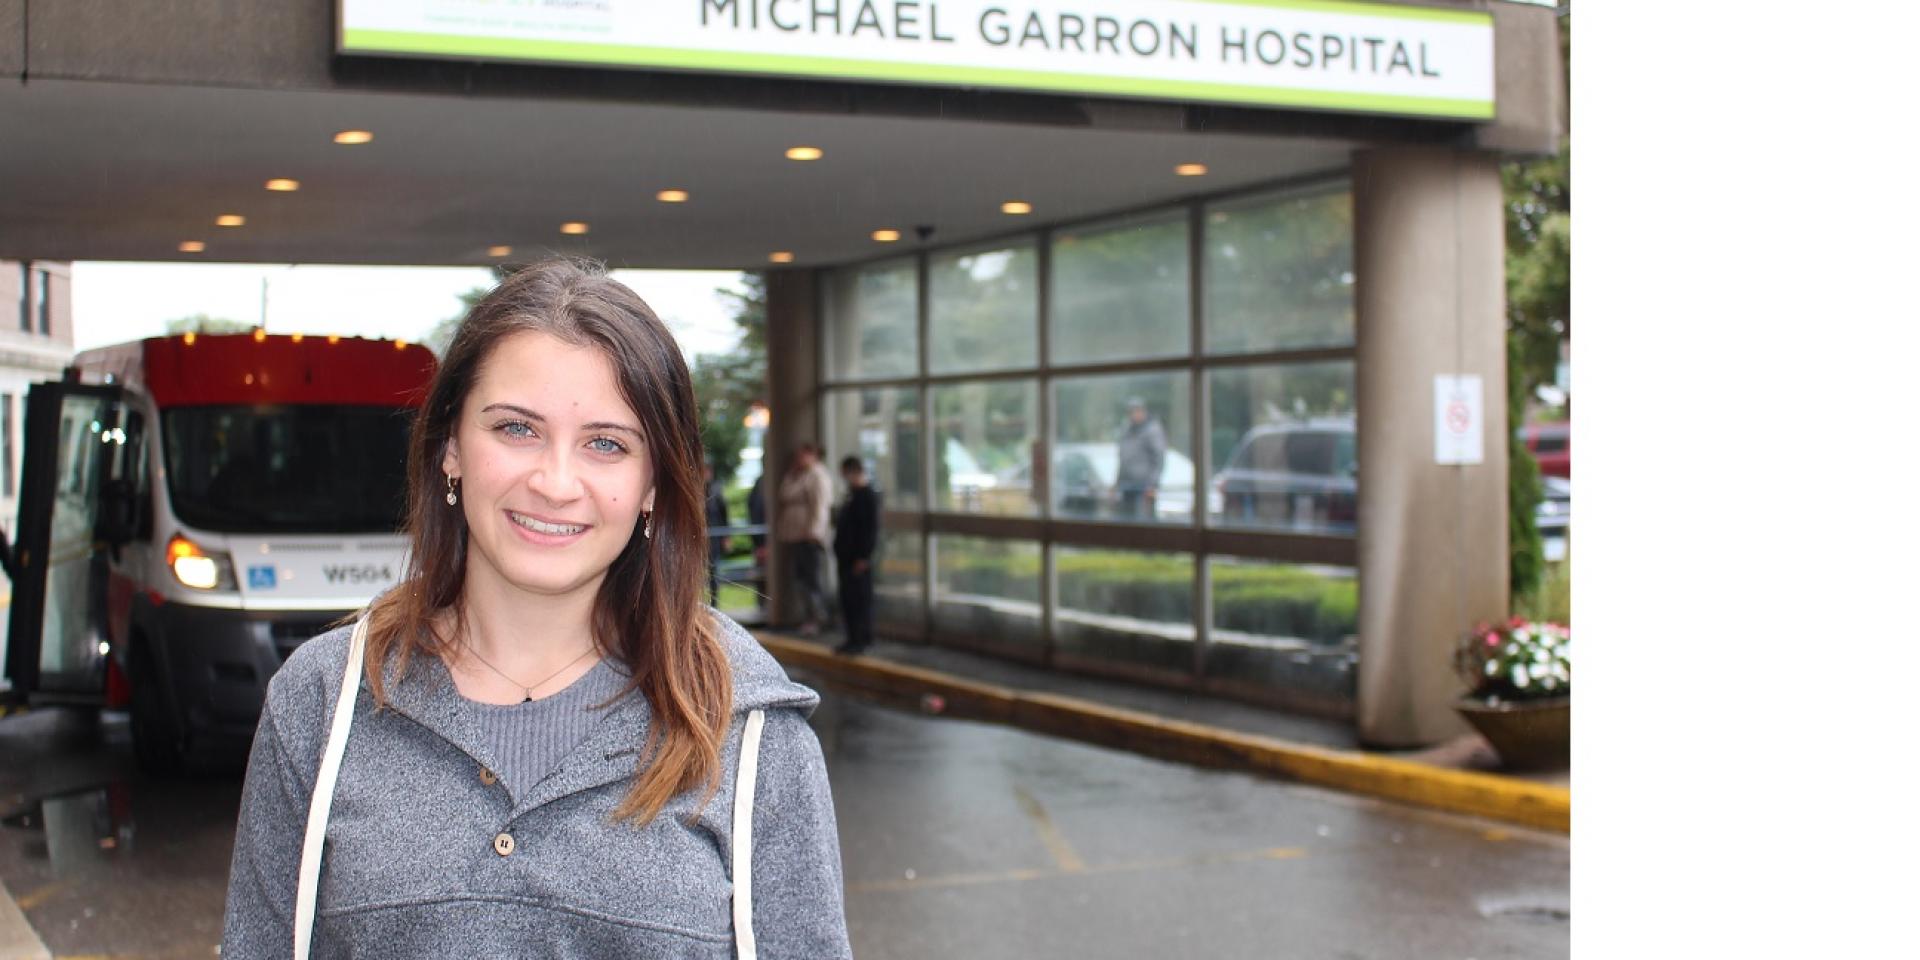 Matina Michelis in front of Michael Garron Hospital 